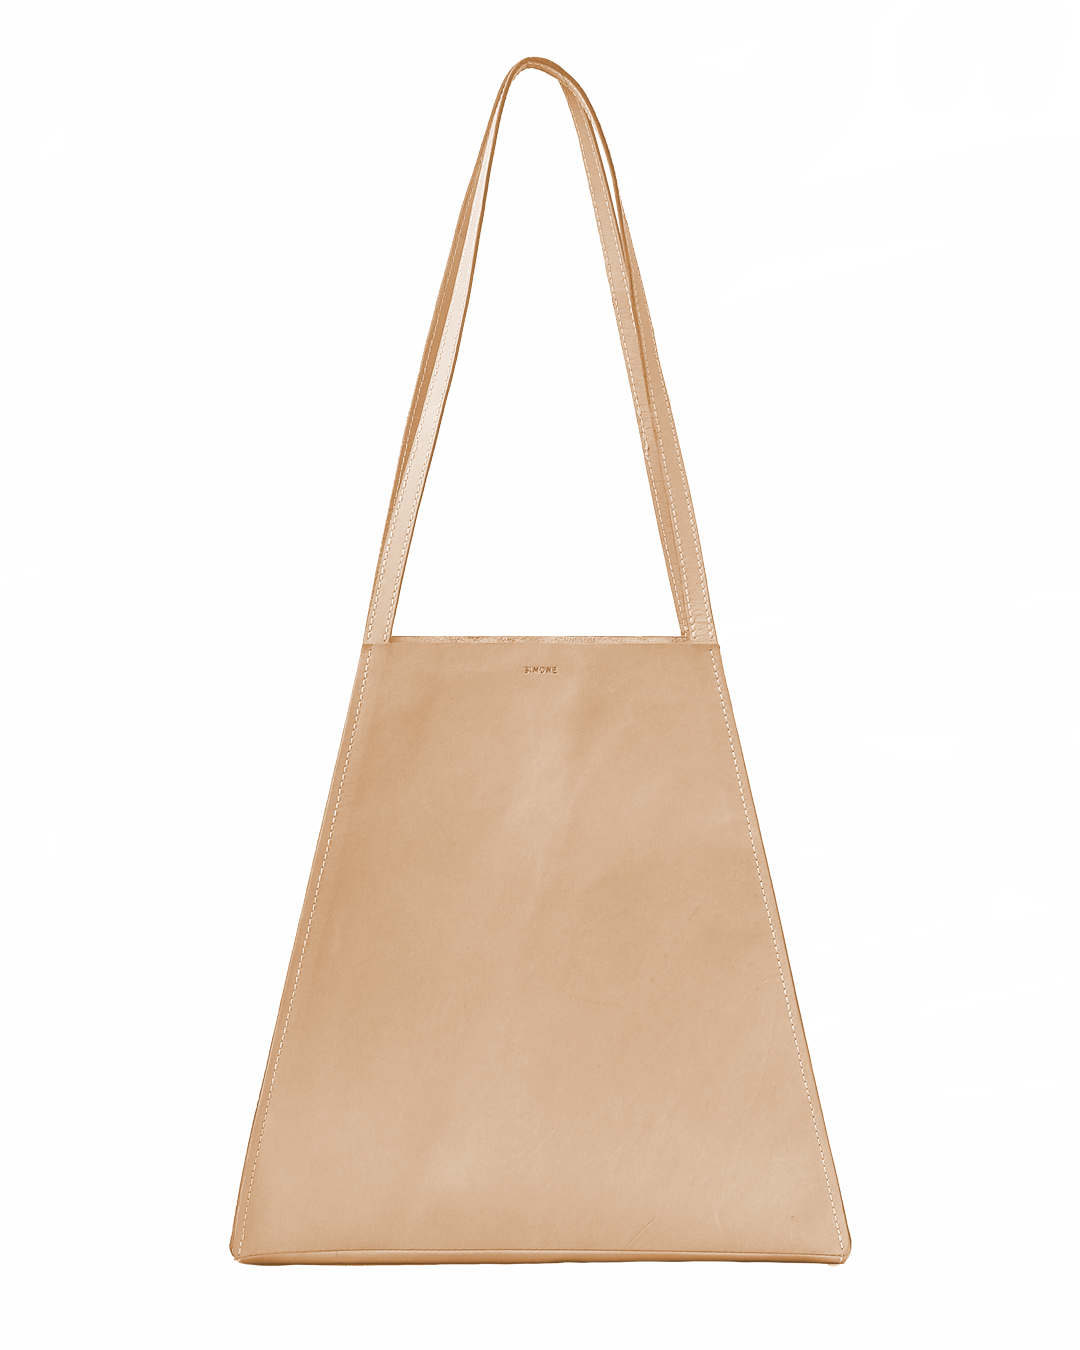 elevation tote leather kit / natural